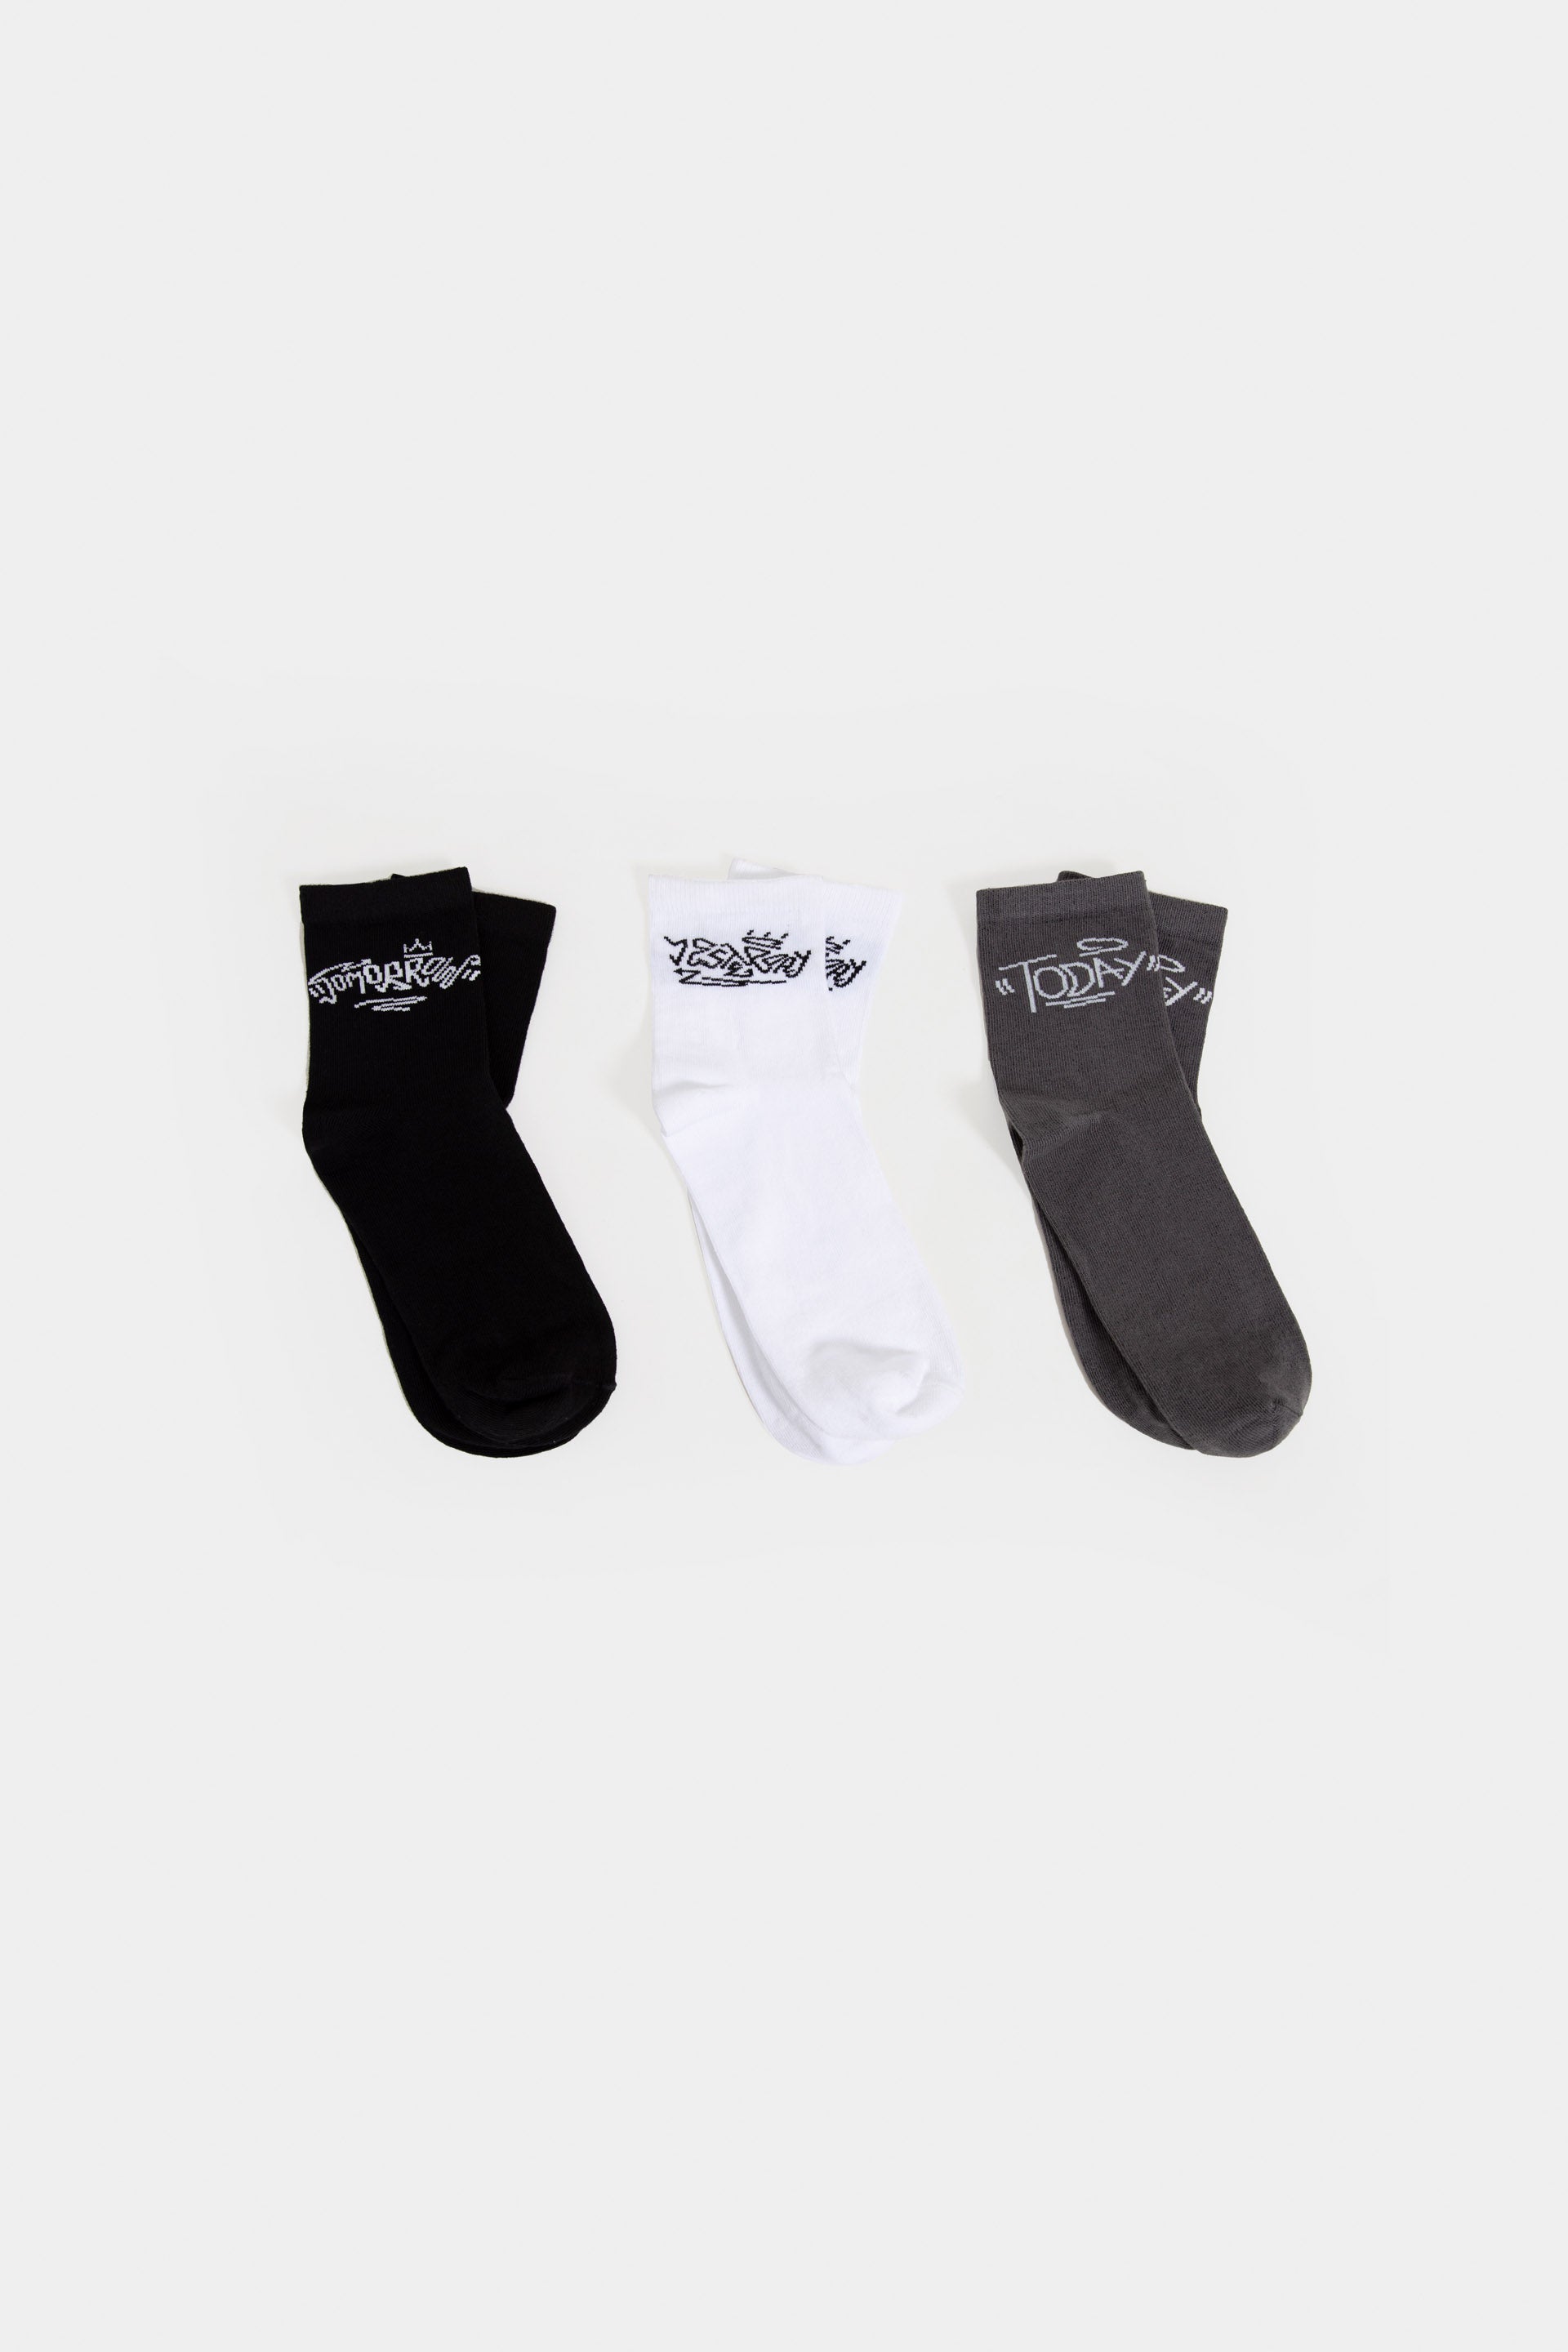 pack of 3 Text socks